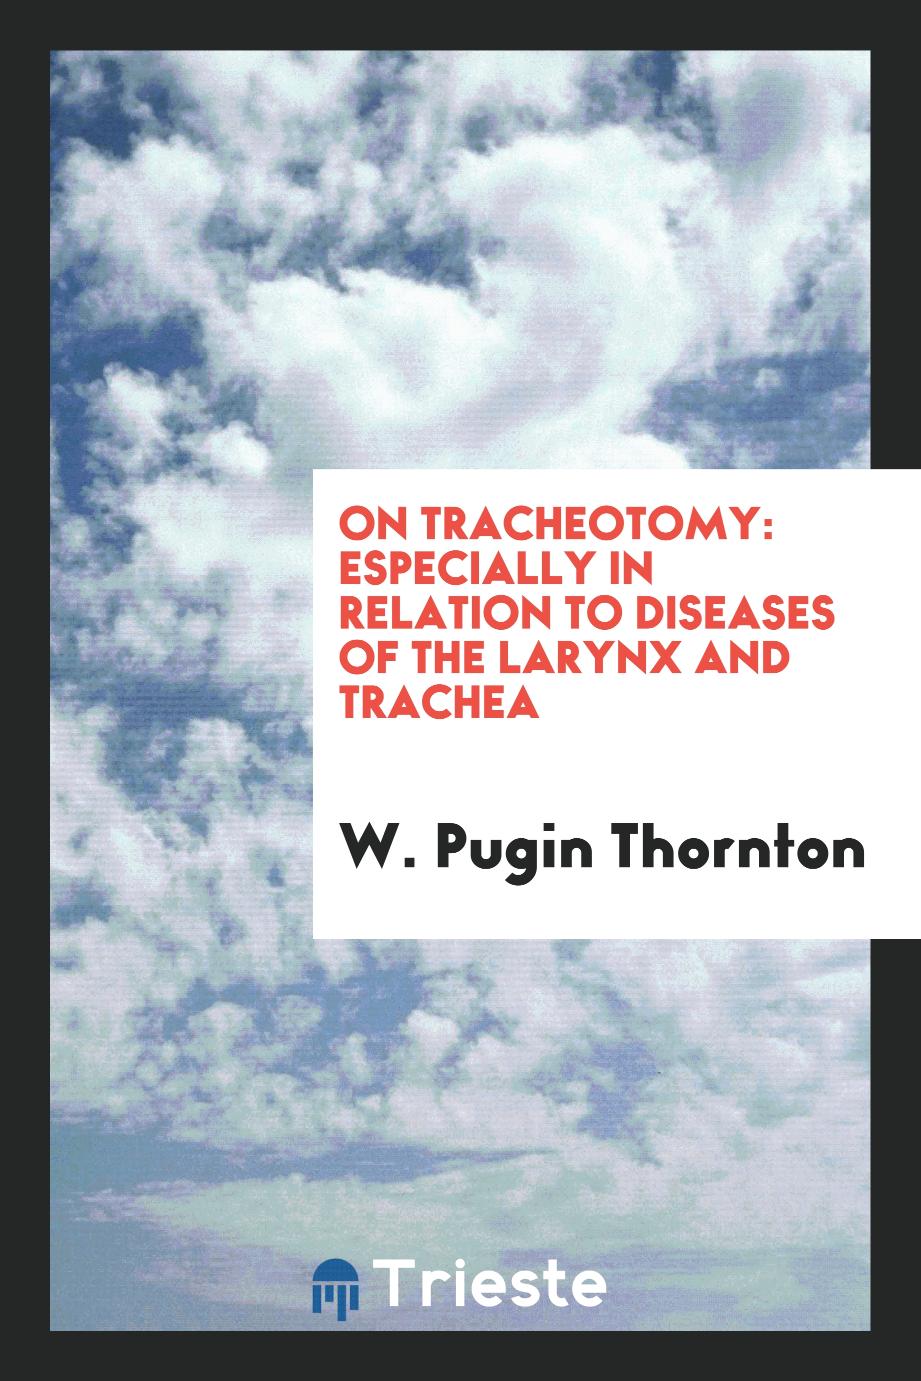 On tracheotomy: especially in relation to diseases of the larynx and trachea